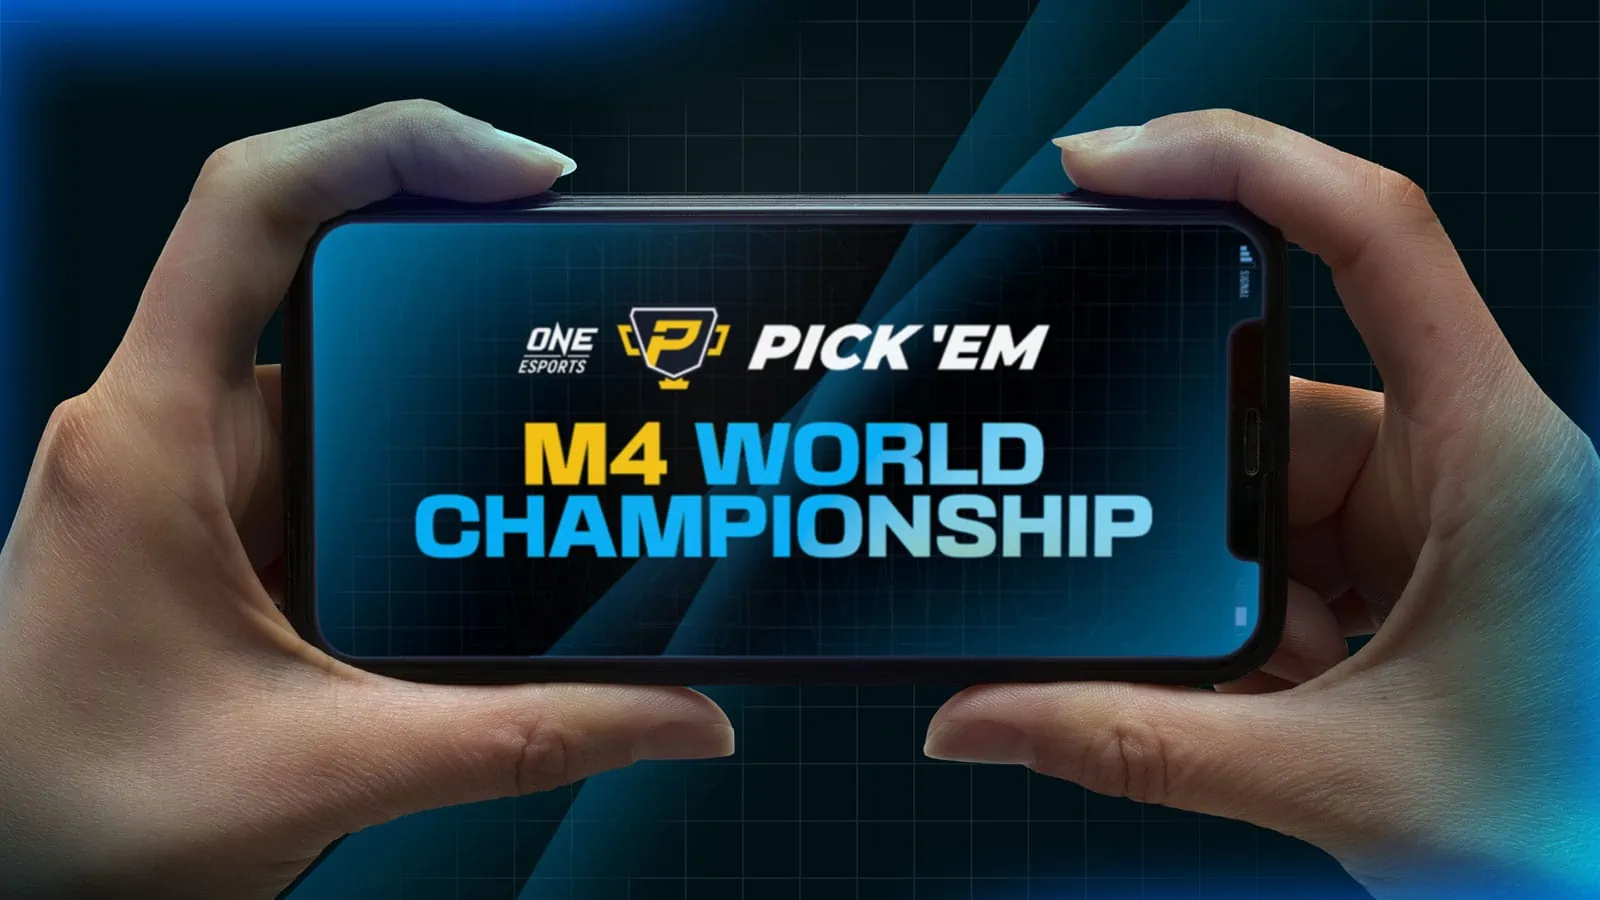 Win up to 3,500 Diamonds in the ONE Esports M4 World Championship Pick Em Challenge ONE Esports